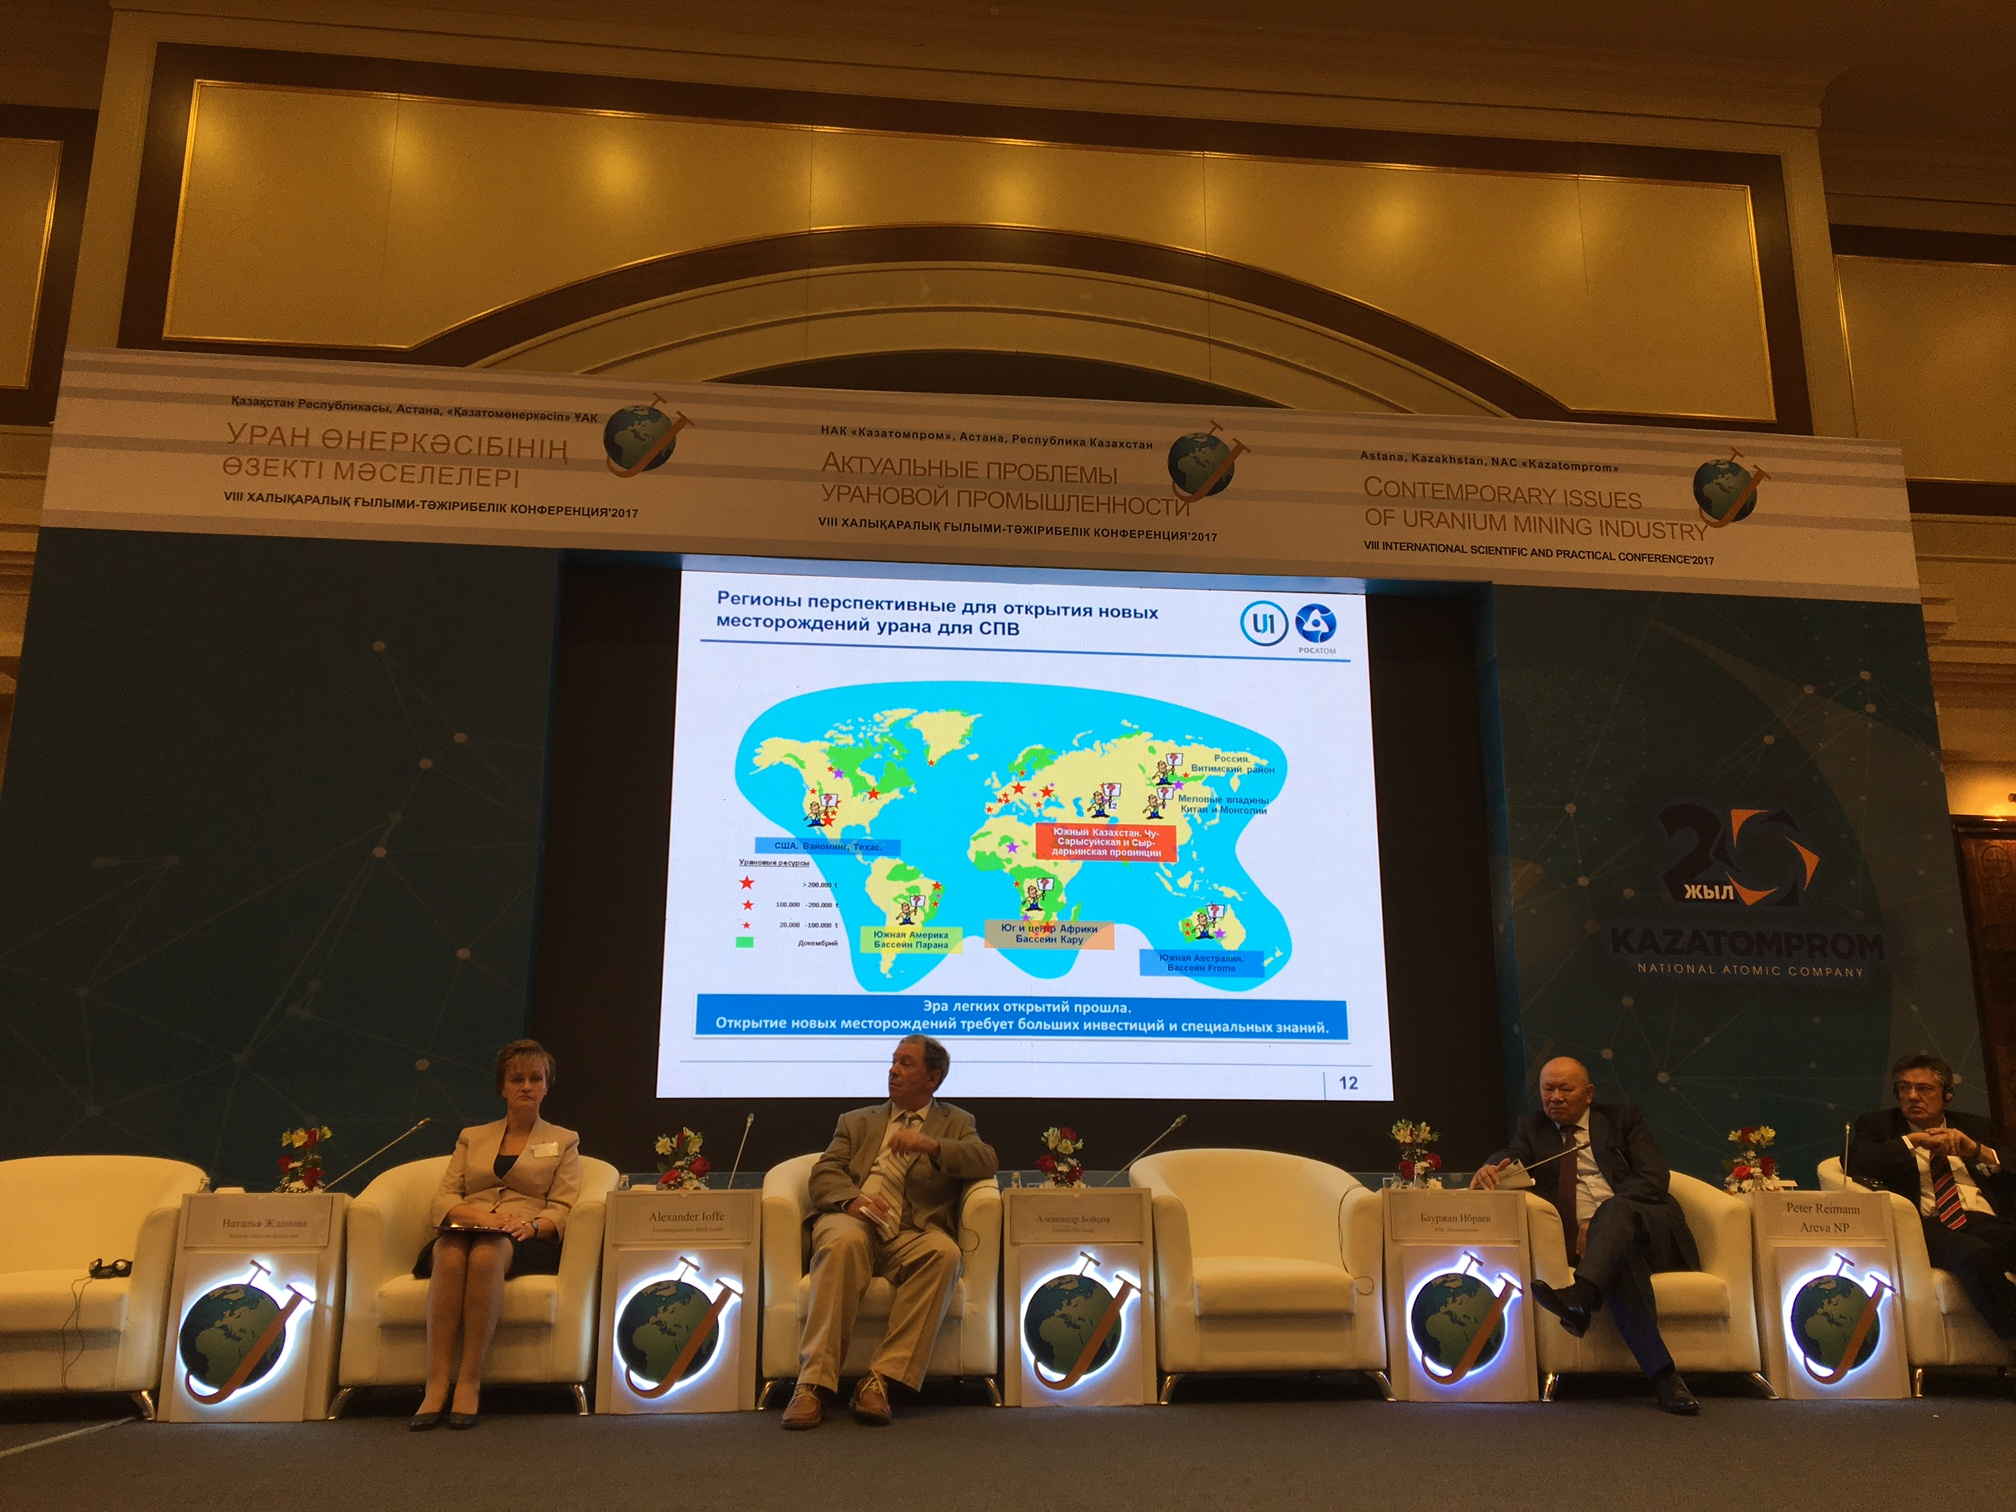 The Eighth International Scientific-Practical Conference “Contemporary Problems of Uranium Industry” began its work in Astana